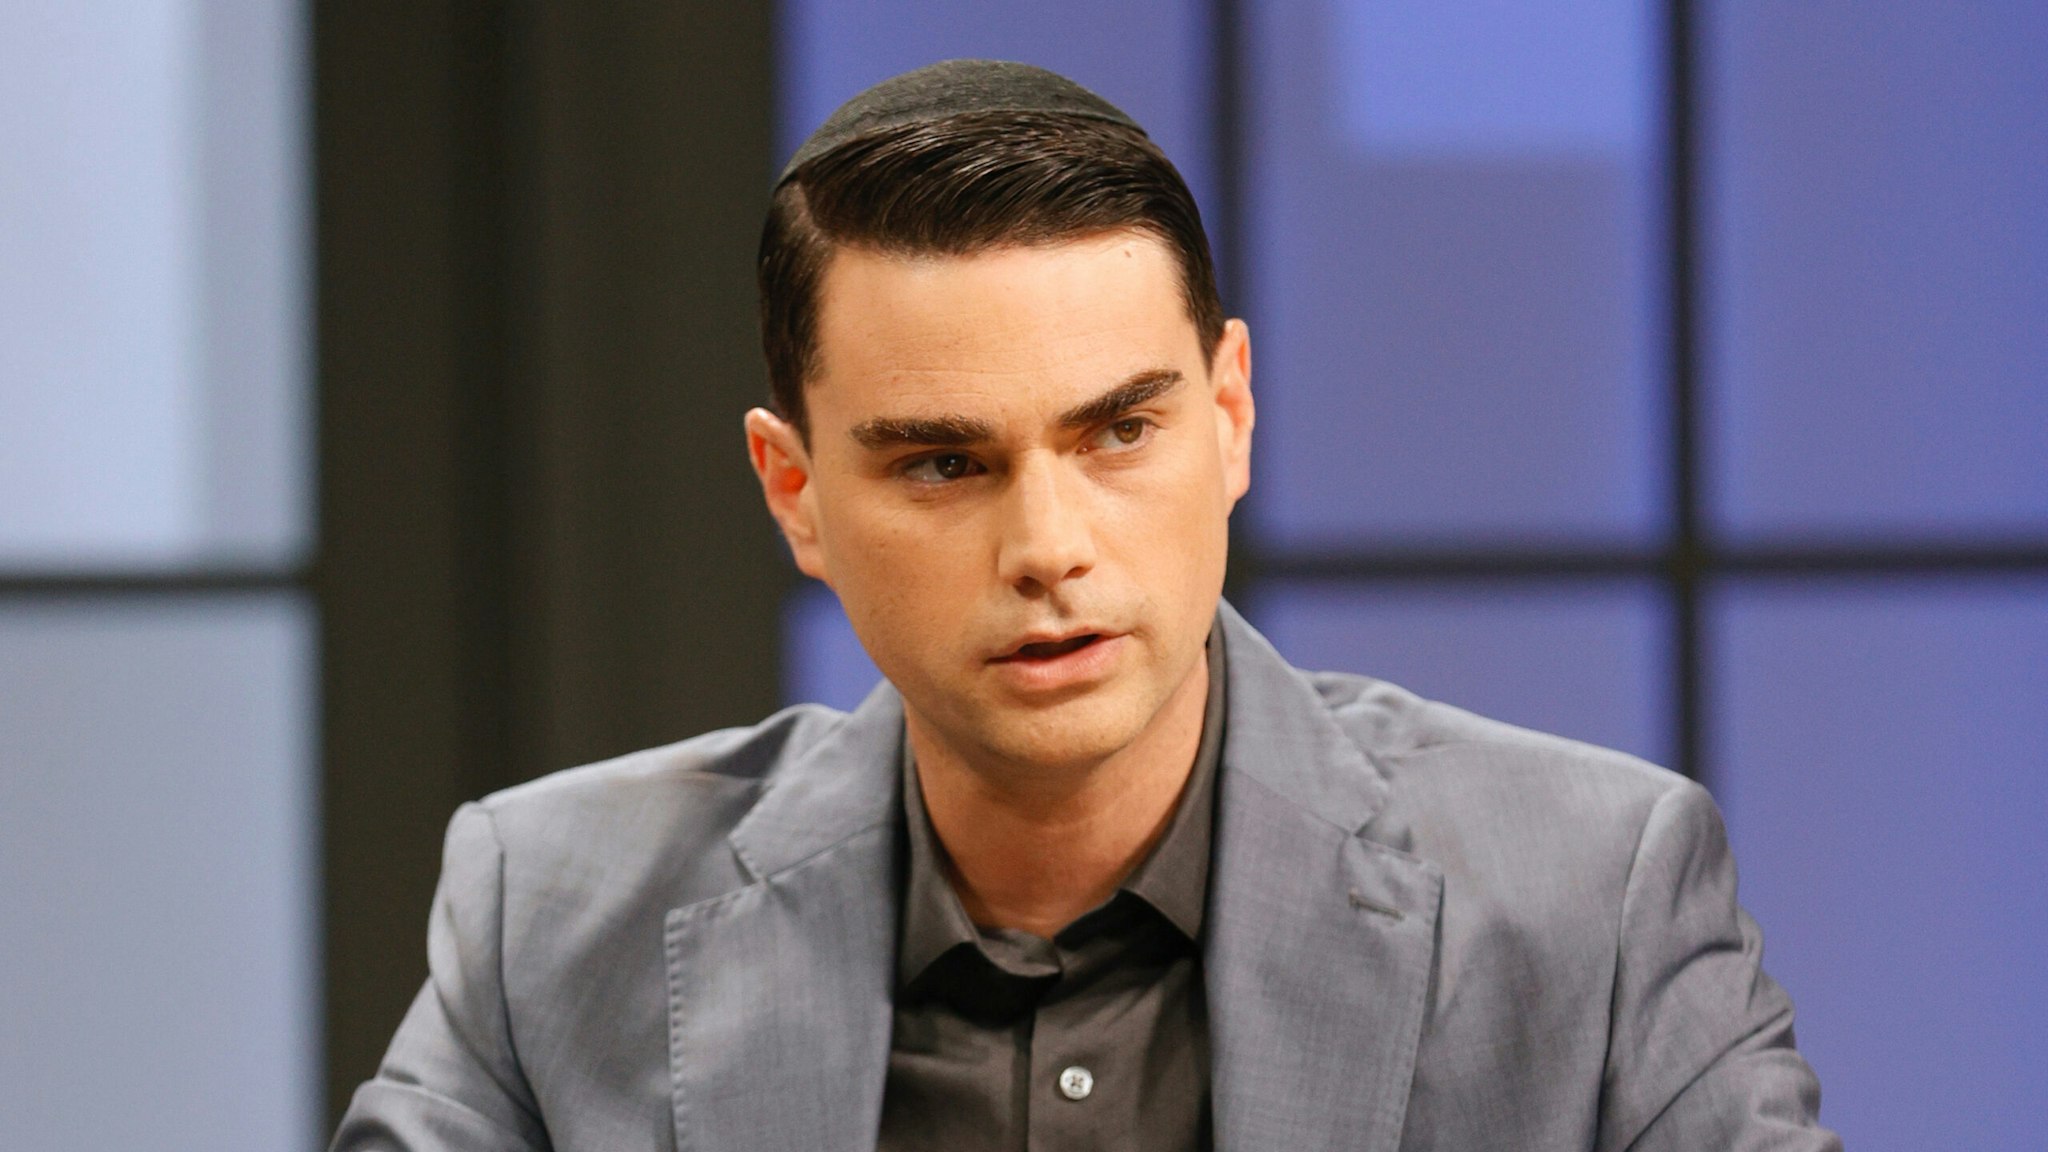 Ben Shapiro is seen on the set of "Candace" on April 28, 2021 in Nashville, Tennessee. The show will air on Friday, April 30, 2021.